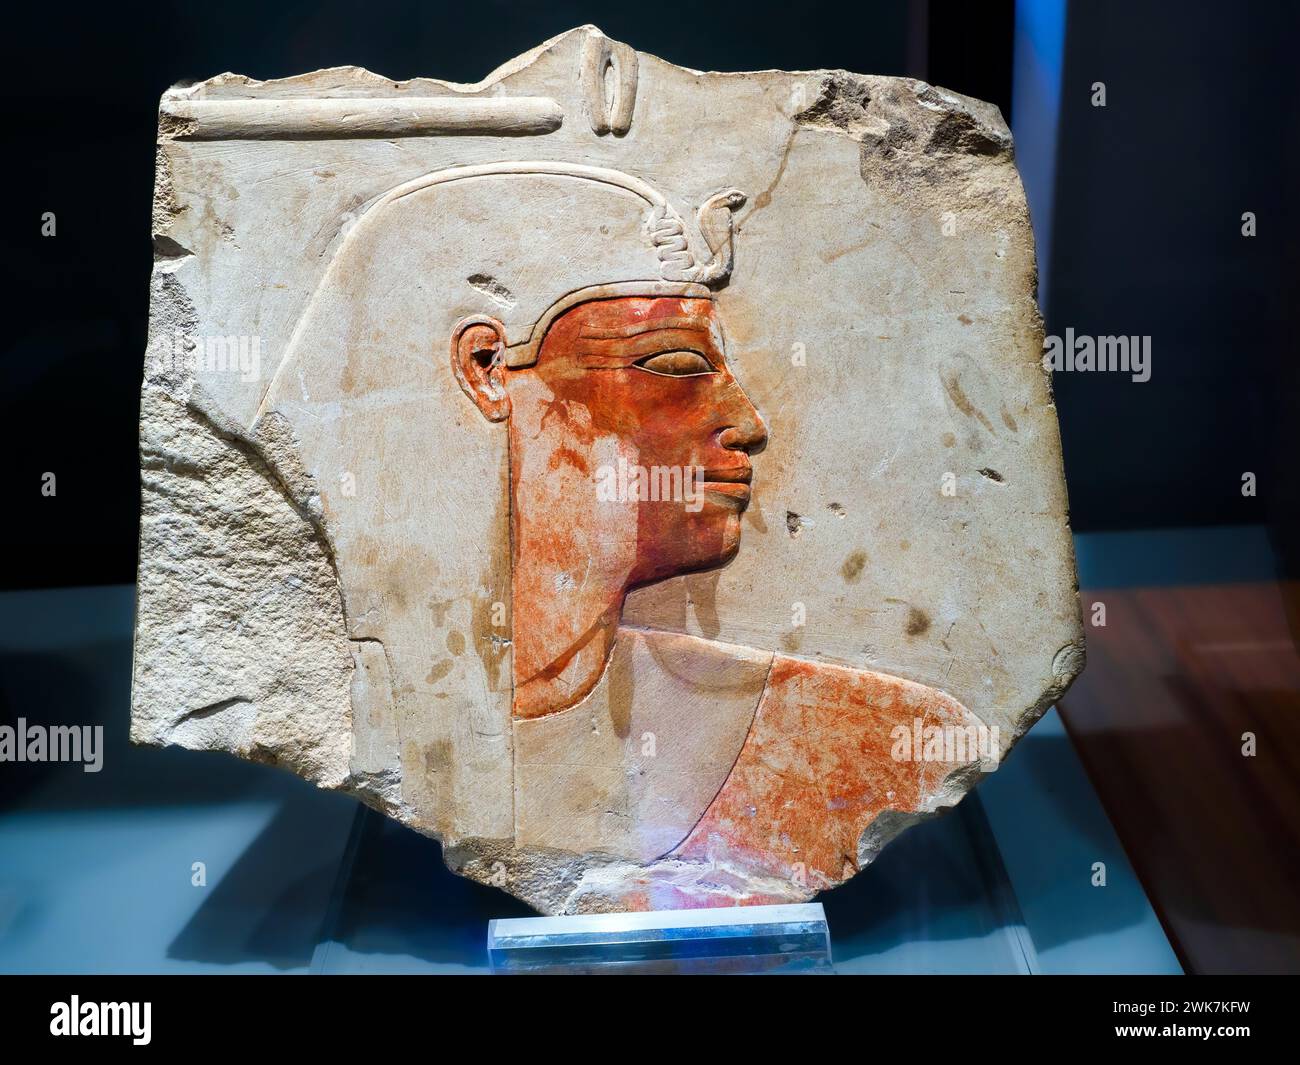 Fragmentary relief of Amenhotep I - New Kingdom, Dynasty XVIII, reign of Amenhotep I (1525 - 1504 BC) - Painted limestone. from Upper Egypt, Great Temple of Amon at Karnak, chapels of Amenhotep I - Museo di Scultura Antica Giovanni Barracco, Rome, Italy Stock Photo